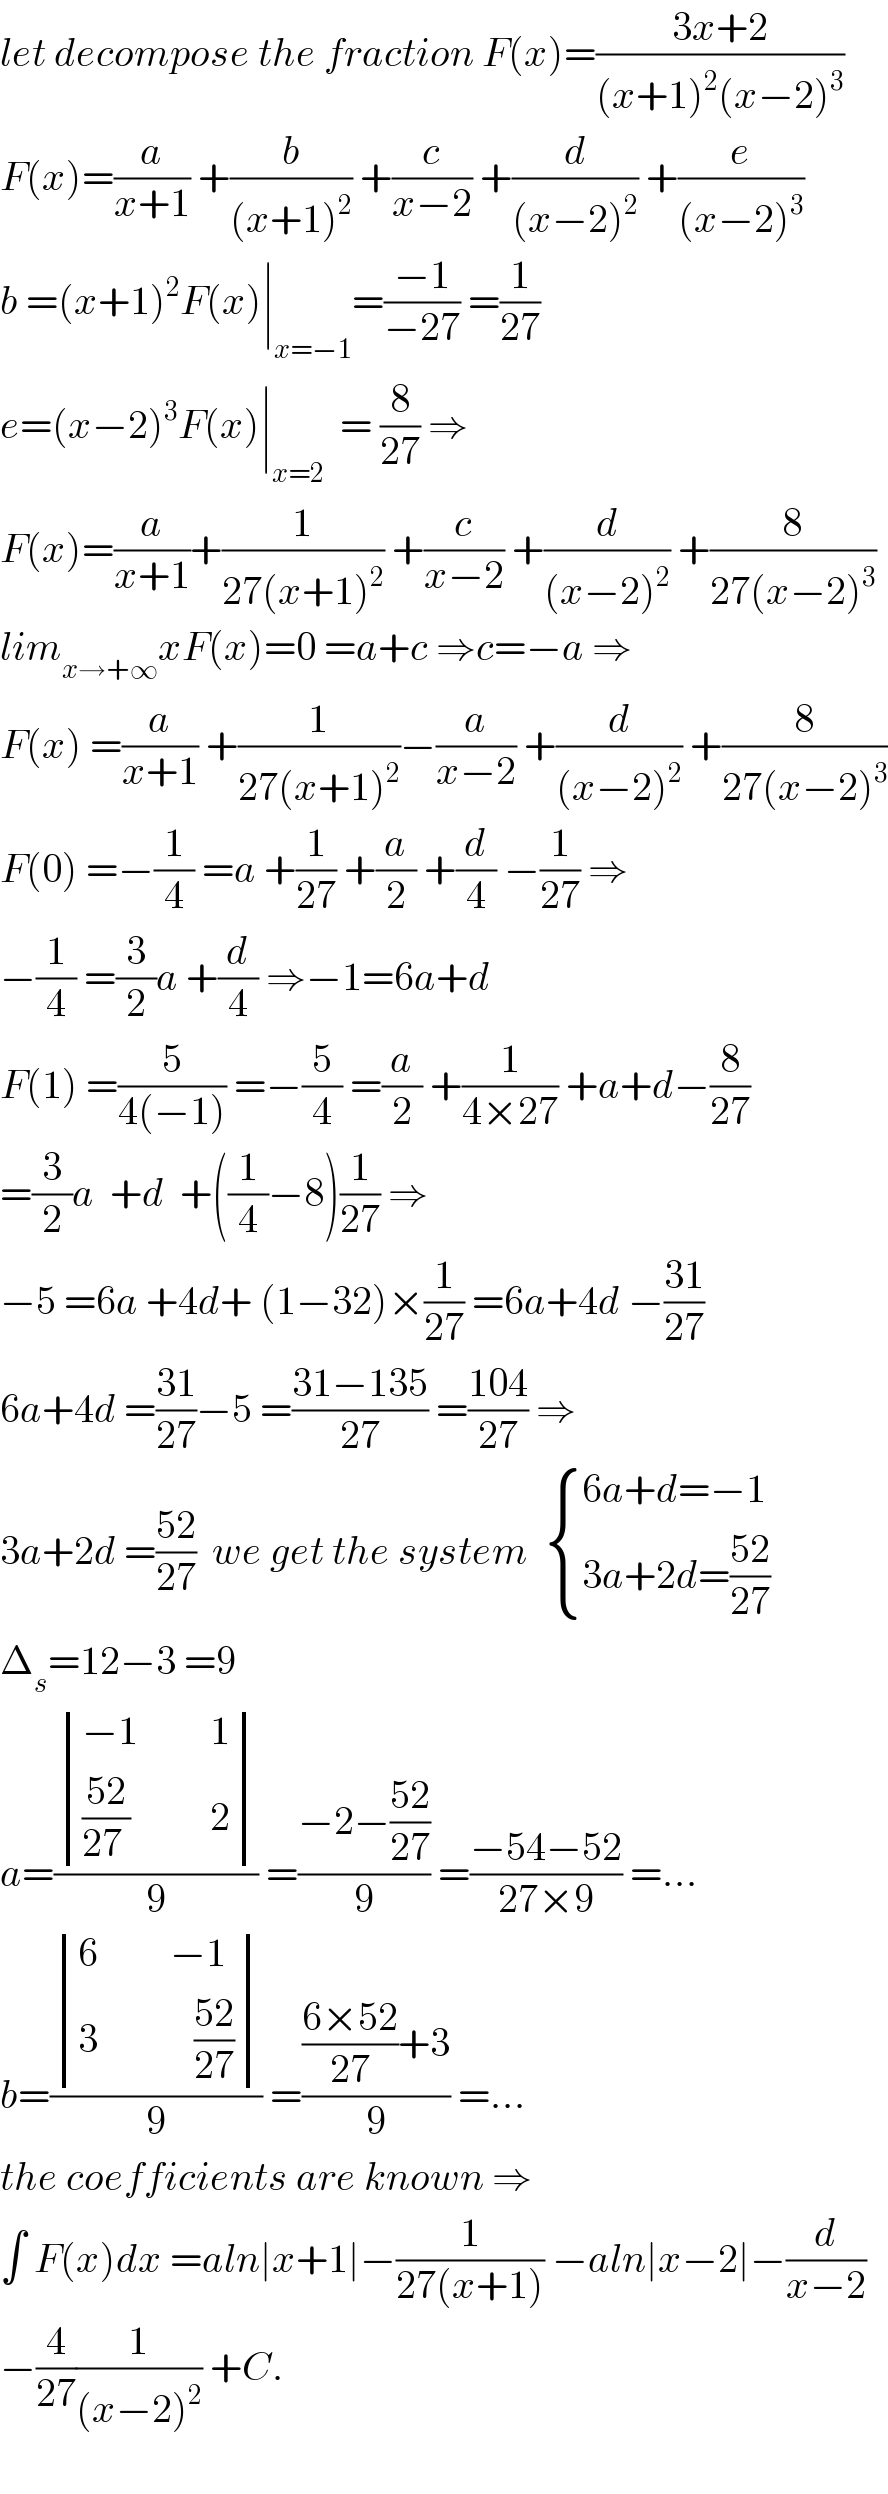 let decompose the fraction F(x)=((3x+2)/((x+1)^2 (x−2)^3 ))  F(x)=(a/(x+1)) +(b/((x+1)^2 )) +(c/(x−2)) +(d/((x−2)^2 )) +(e/((x−2)^3 ))  b =(x+1)^2 F(x)∣_(x=−1) =((−1)/(−27)) =(1/(27))  e=(x−2)^3 F(x)∣_(x=2)   = (8/(27)) ⇒  F(x)=(a/(x+1))+(1/(27(x+1)^2 )) +(c/(x−2)) +(d/((x−2)^2 )) +(8/(27(x−2)^3 ))  lim_(x→+∞) xF(x)=0 =a+c ⇒c=−a ⇒  F(x) =(a/(x+1)) +(1/(27(x+1)^2 ))−(a/(x−2)) +(d/((x−2)^2 )) +(8/(27(x−2)^3 ))  F(0) =−(1/4) =a +(1/(27)) +(a/2) +(d/4) −(1/(27)) ⇒  −(1/4) =(3/2)a +(d/4) ⇒−1=6a+d  F(1) =(5/(4(−1))) =−(5/4) =(a/2) +(1/(4×27)) +a+d−(8/(27))  =(3/2)a  +d  +((1/4)−8)(1/(27)) ⇒  −5 =6a +4d+ (1−32)×(1/(27)) =6a+4d −((31)/(27))  6a+4d =((31)/(27))−5 =((31−135)/(27)) =((104)/(27)) ⇒  3a+2d =((52)/(27))  we get the system   { ((6a+d=−1)),((3a+2d=((52)/(27)))) :}  Δ_s =12−3 =9  a=( determinant (((−1         1)),((((52)/(27 ))          2)))/9) =((−2−((52)/(27)))/9) =((−54−52)/(27×9)) =...  b=( determinant (((6         −1)),((3            ((52)/(27)))))/9) =((((6×52)/(27))+3)/9) =...  the coefficients are known ⇒  ∫ F(x)dx =aln∣x+1∣−(1/(27(x+1))) −aln∣x−2∣−(d/(x−2))  −(4/(27))(1/((x−2)^2 )) +C.    